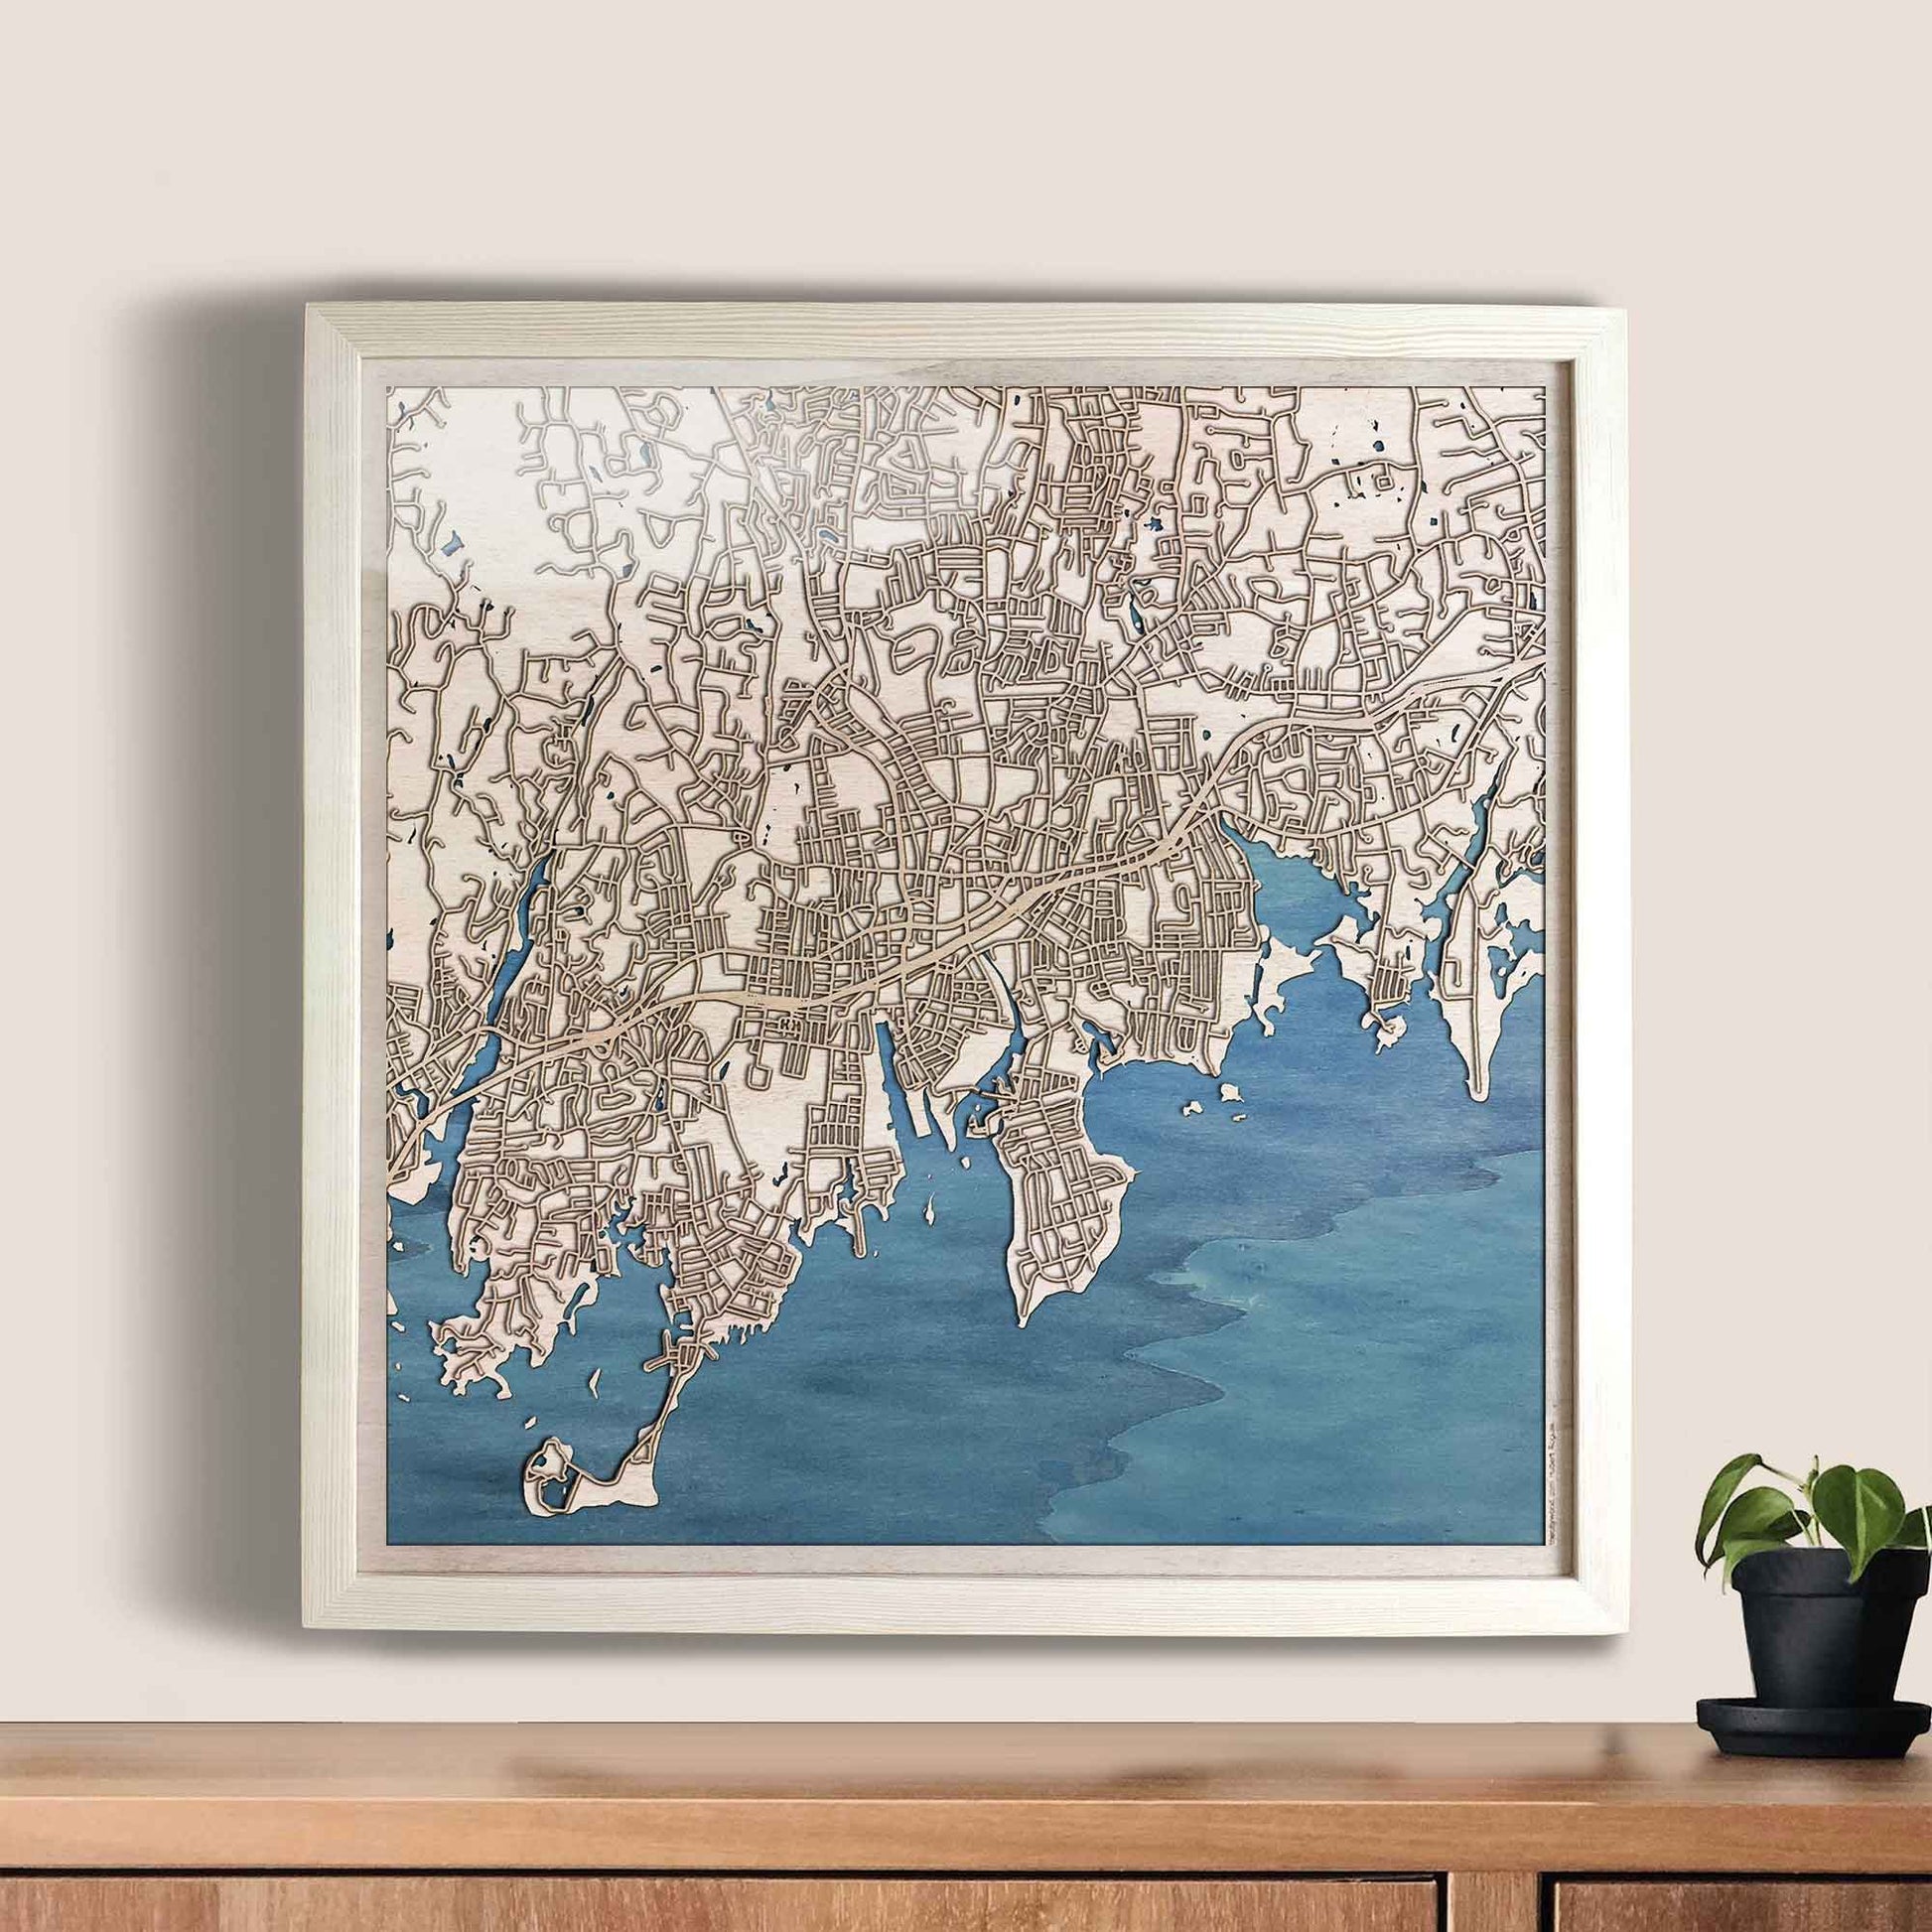 Stamford Wooden Map by CityWood - Custom Wood Map Art - Unique Laser Cut Engraved - Anniversary Gift